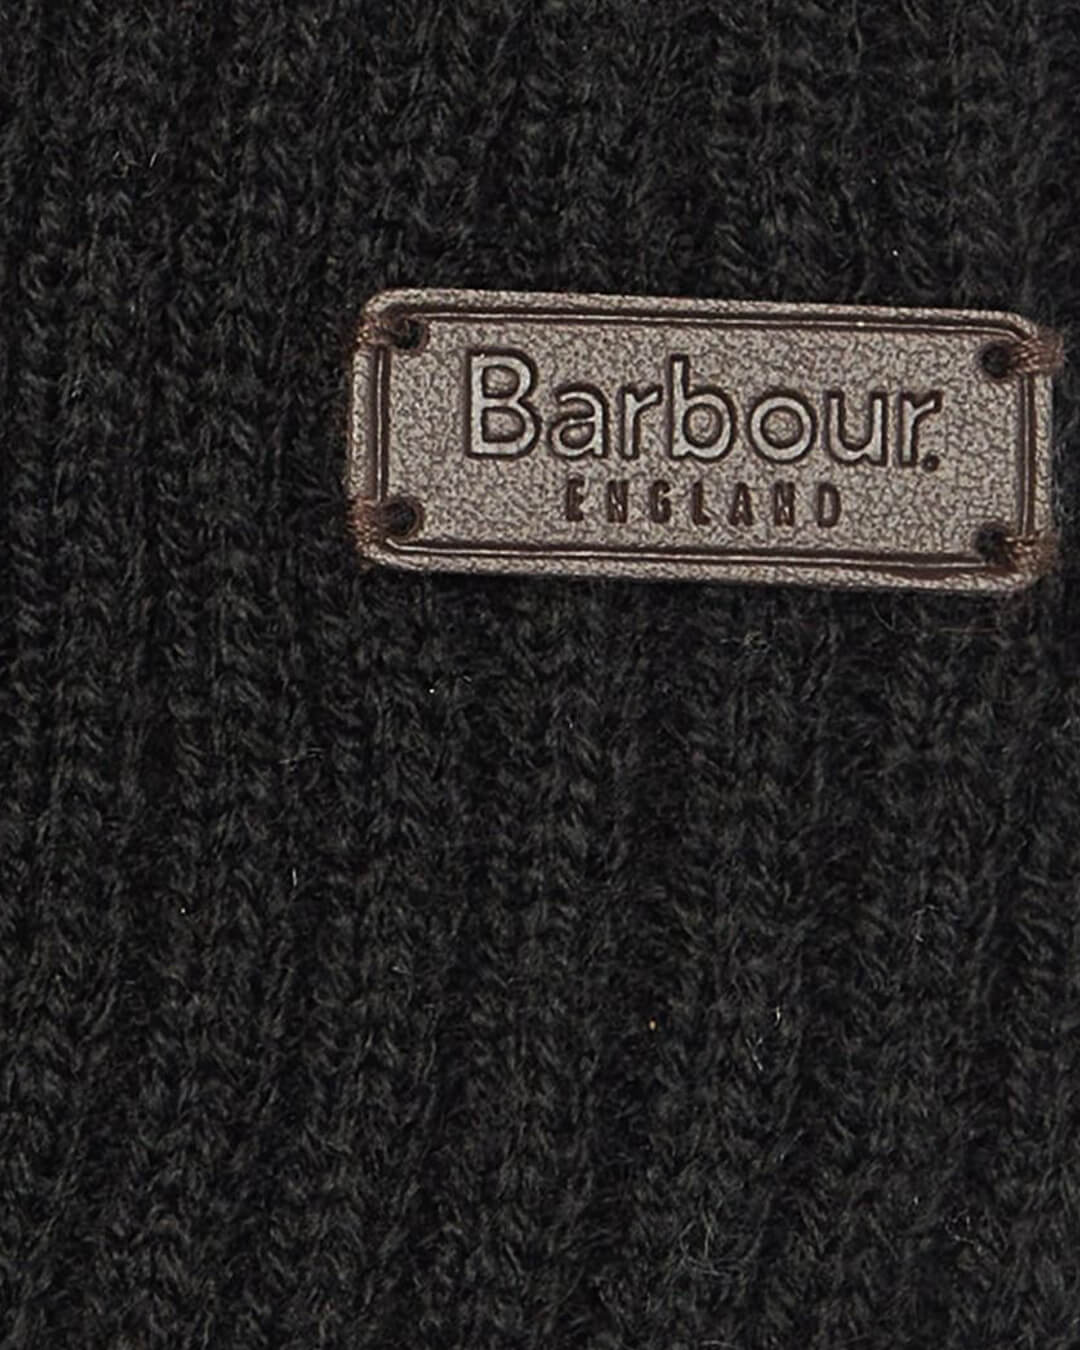 Barbour Other Accessories ONE SIZE Barbour Black Crimdon Beanie And Scarf Set